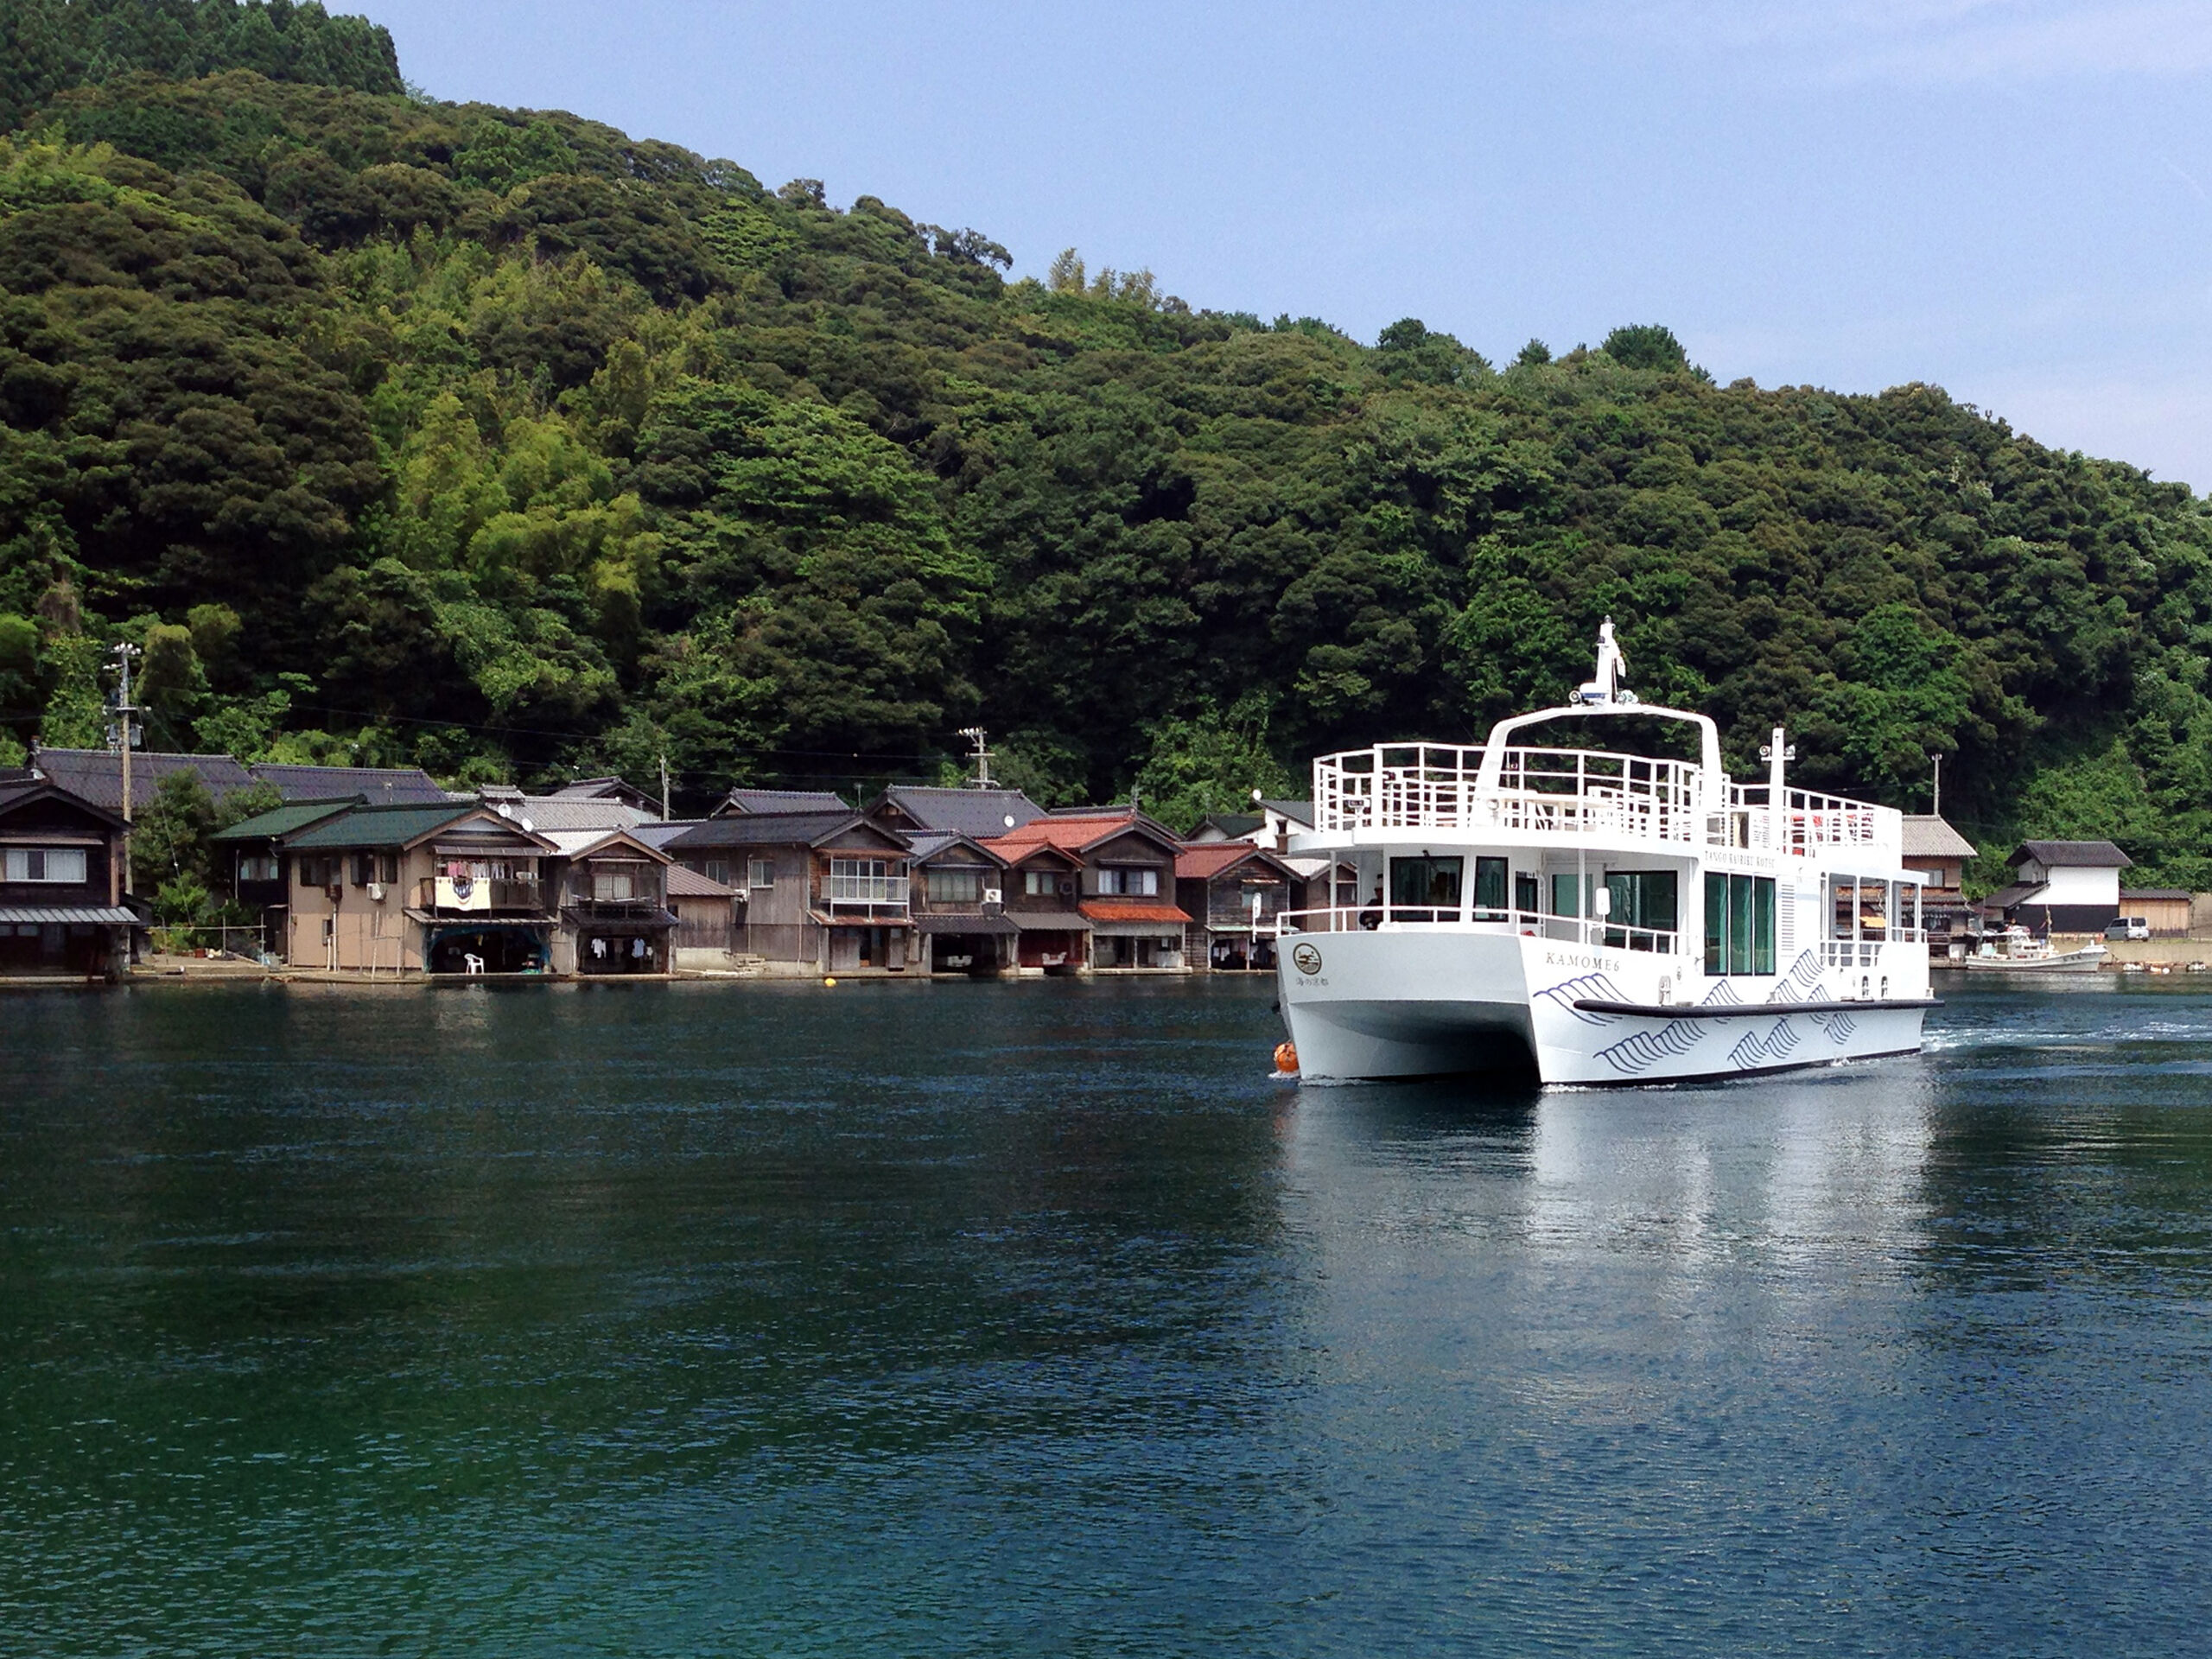 Kyoto 【Amanohashidate・Ine・Tango】2 Day Free Ticket <Line bus, sightseeing boat, cable car, sightseeing boat>